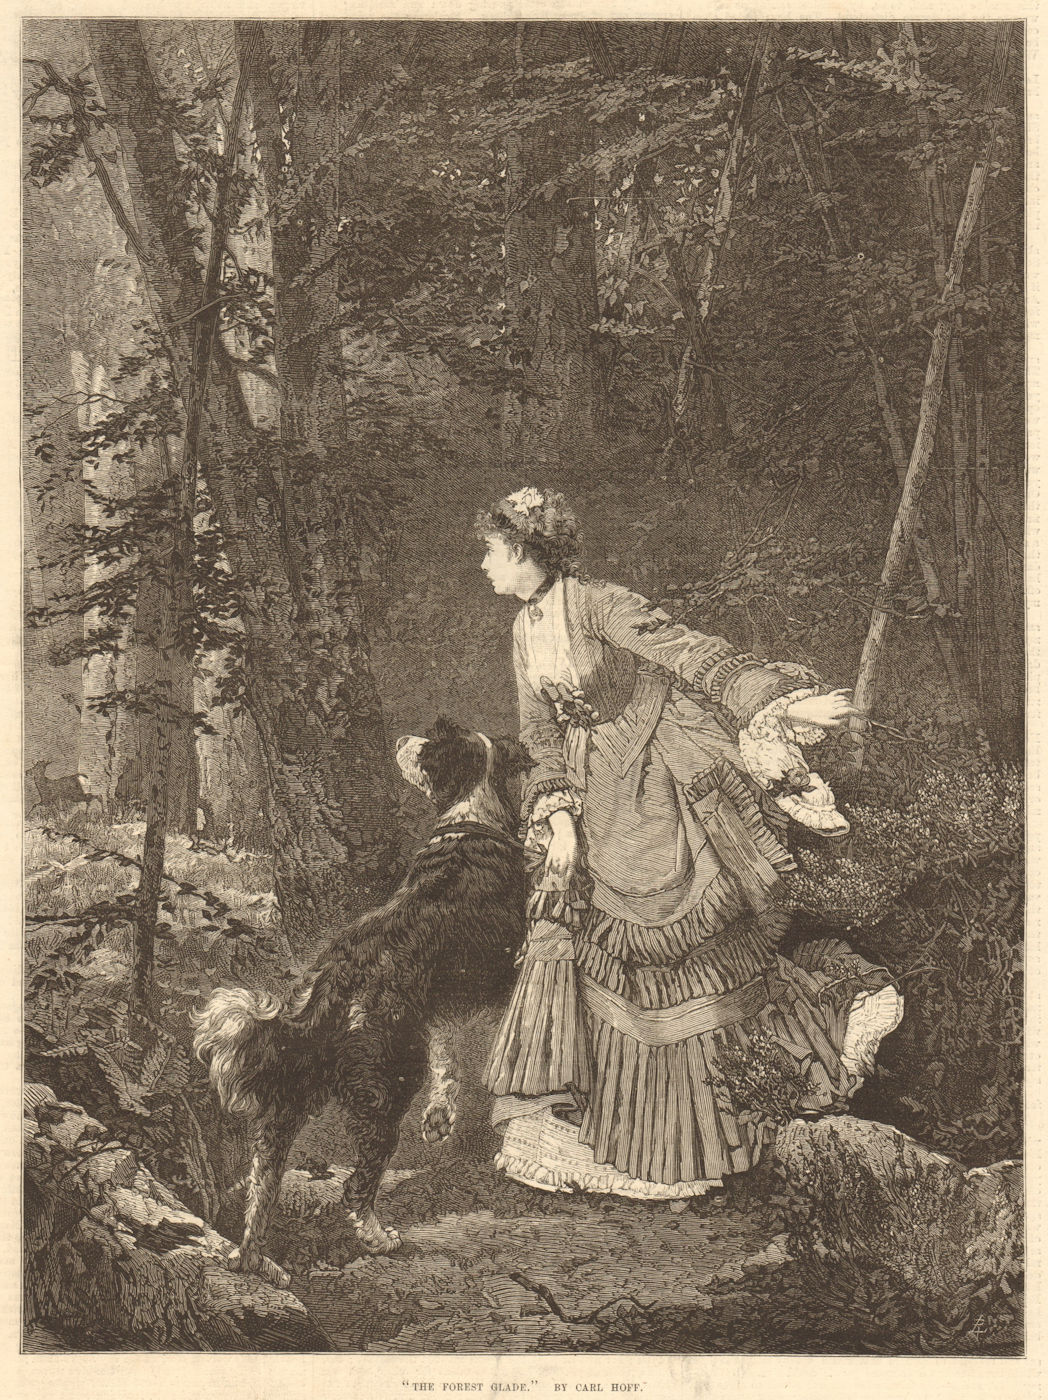 Associate Product "The forest glade". By Carl Hoff. Dogs 1874 antique ILN full page print